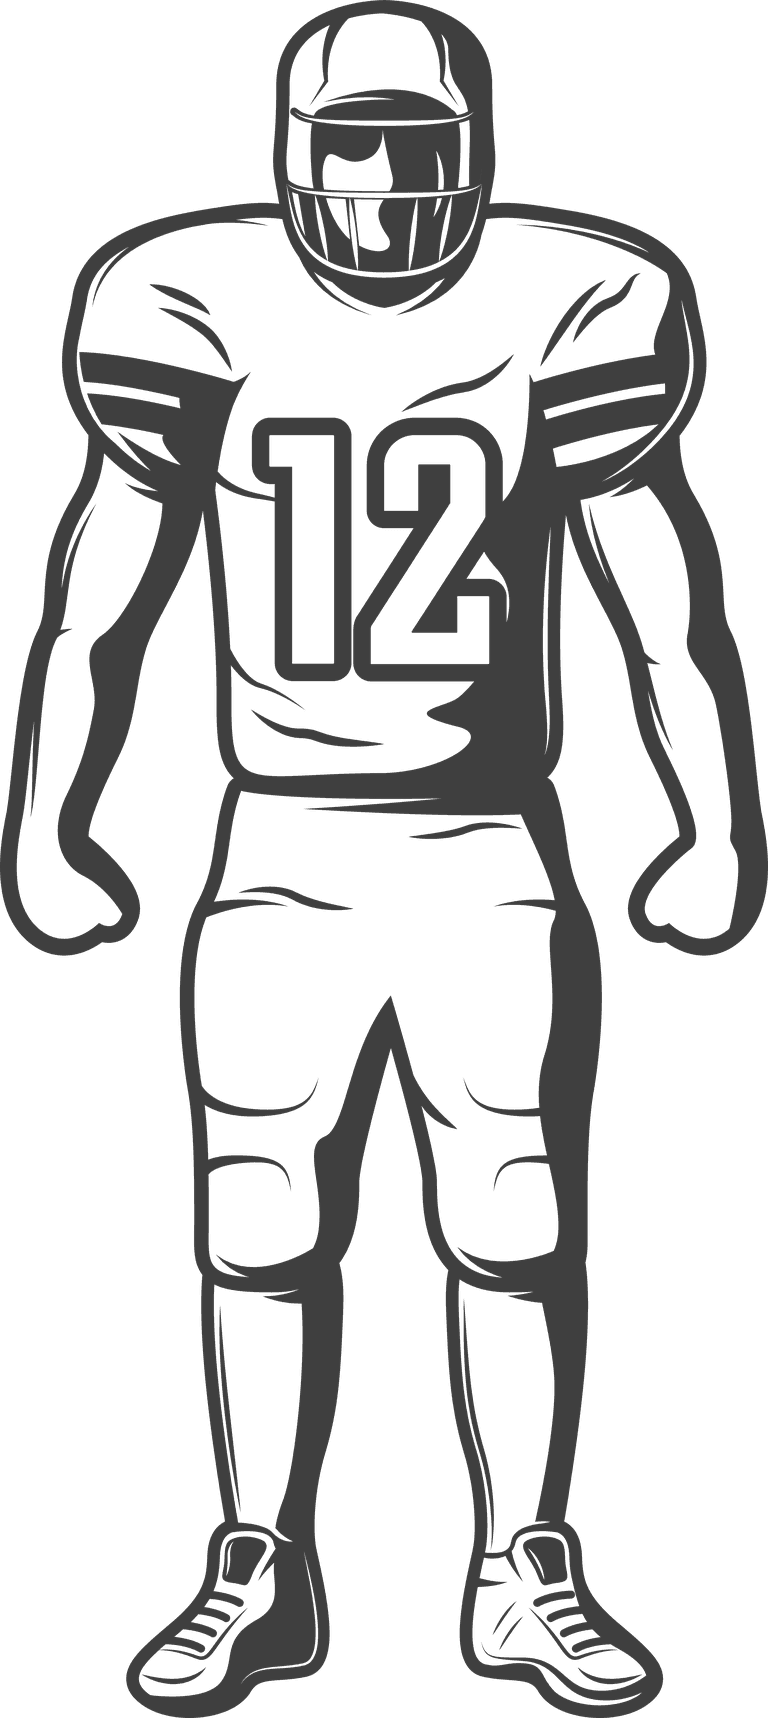 american football monochrome elements sports equipment clothing players trophy food isolate